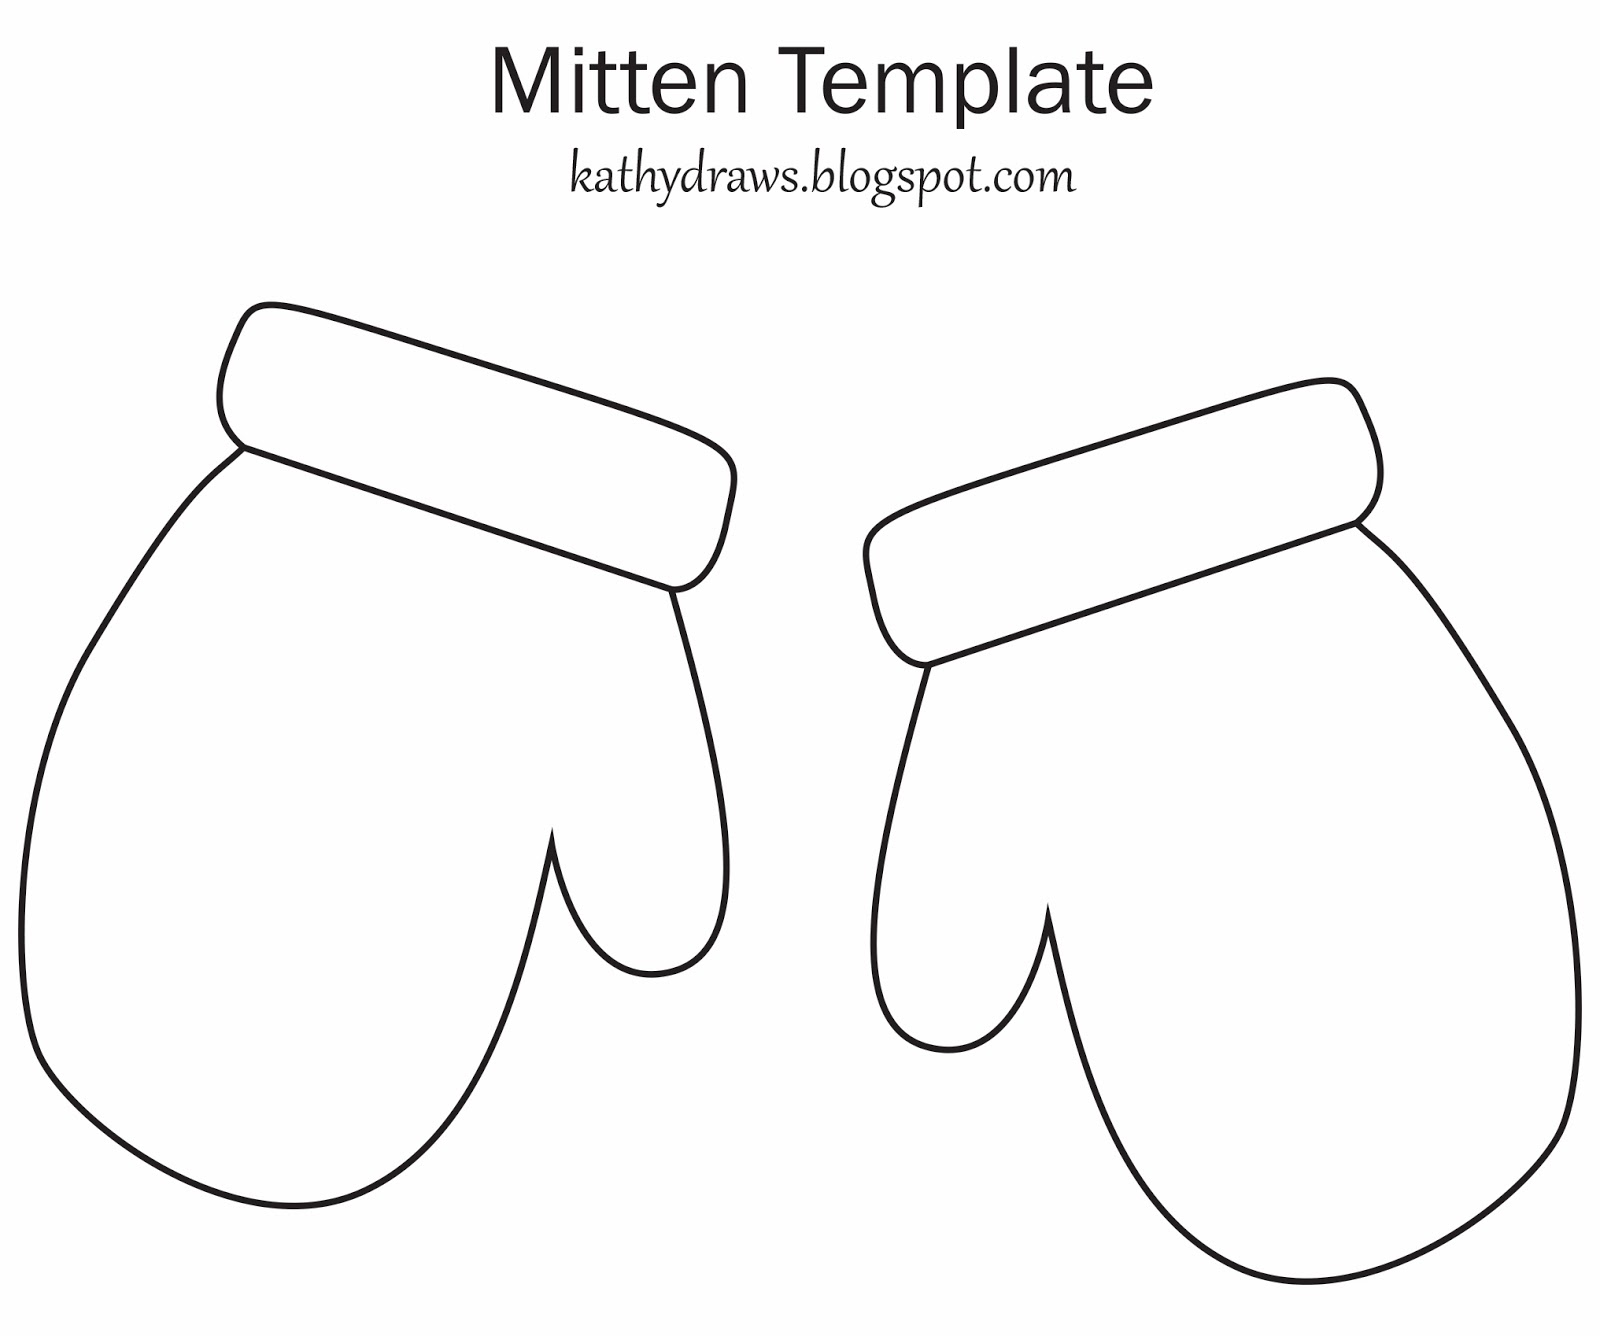 Mittens Template Free